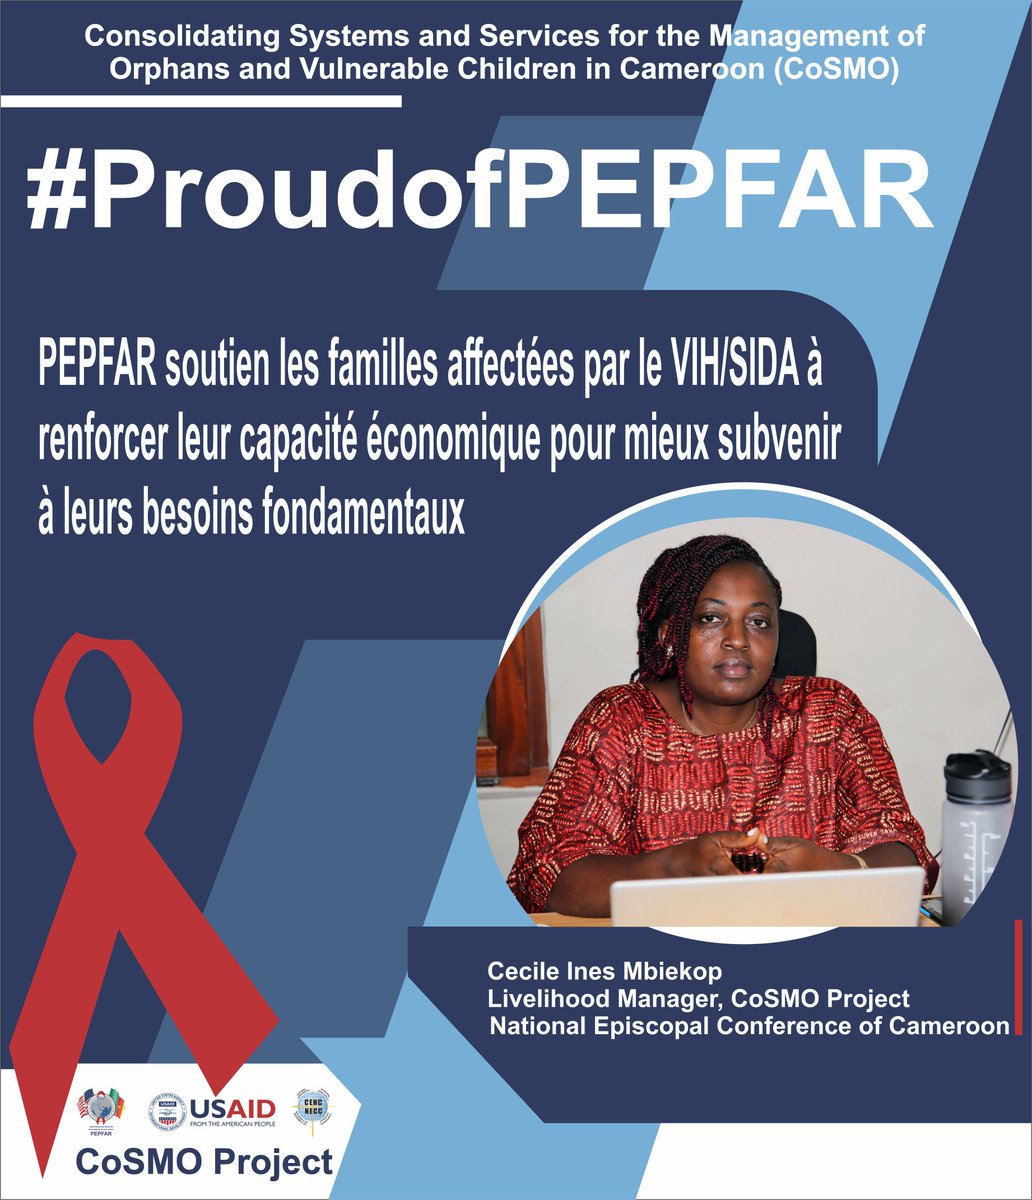 For over 20 years @PEPFAR has helped families affected by HIV/AIDS #Cameroon to strengthen their economic capacity to better meet their basic needs.

#ProudofPEPFAR
#ReachAllChildren
@GappDc